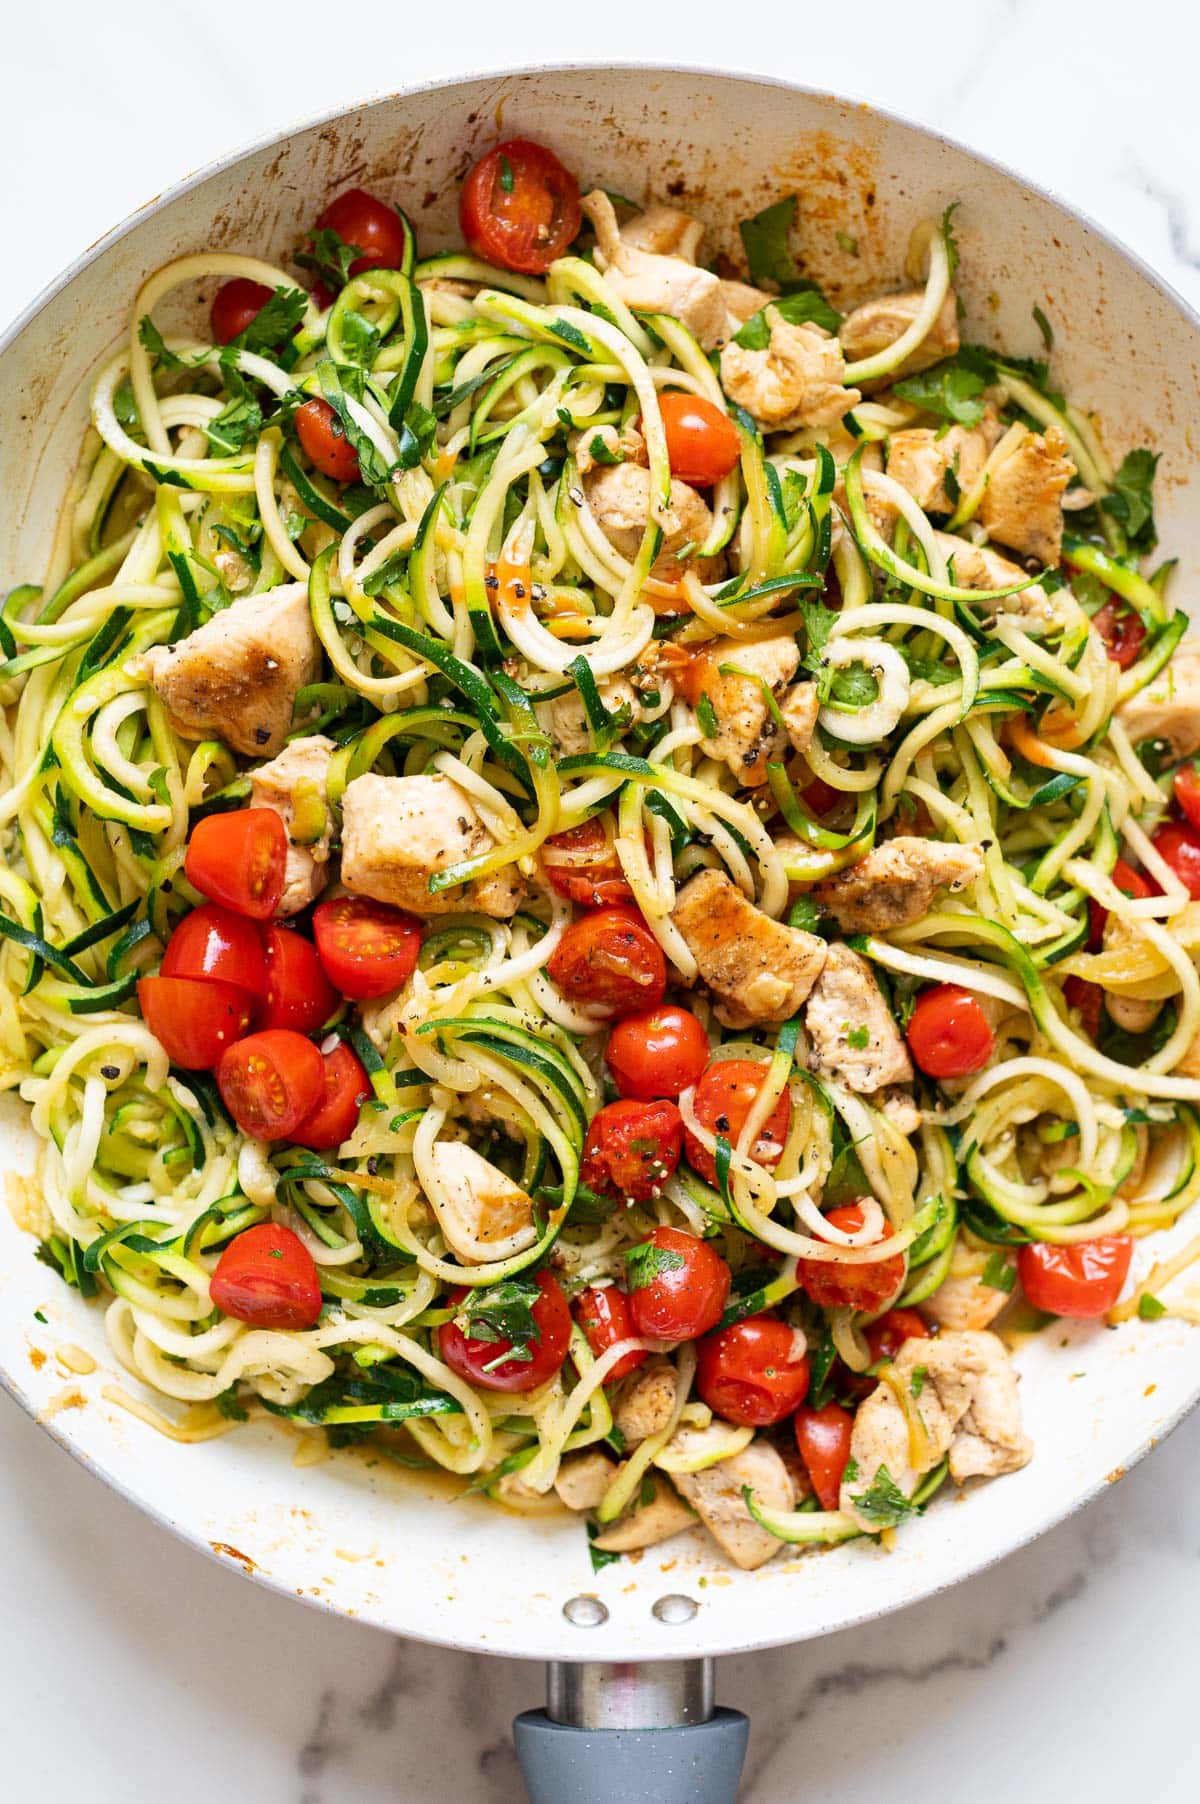 Zucchini noodles with chicken and tomatoes in a skillet.